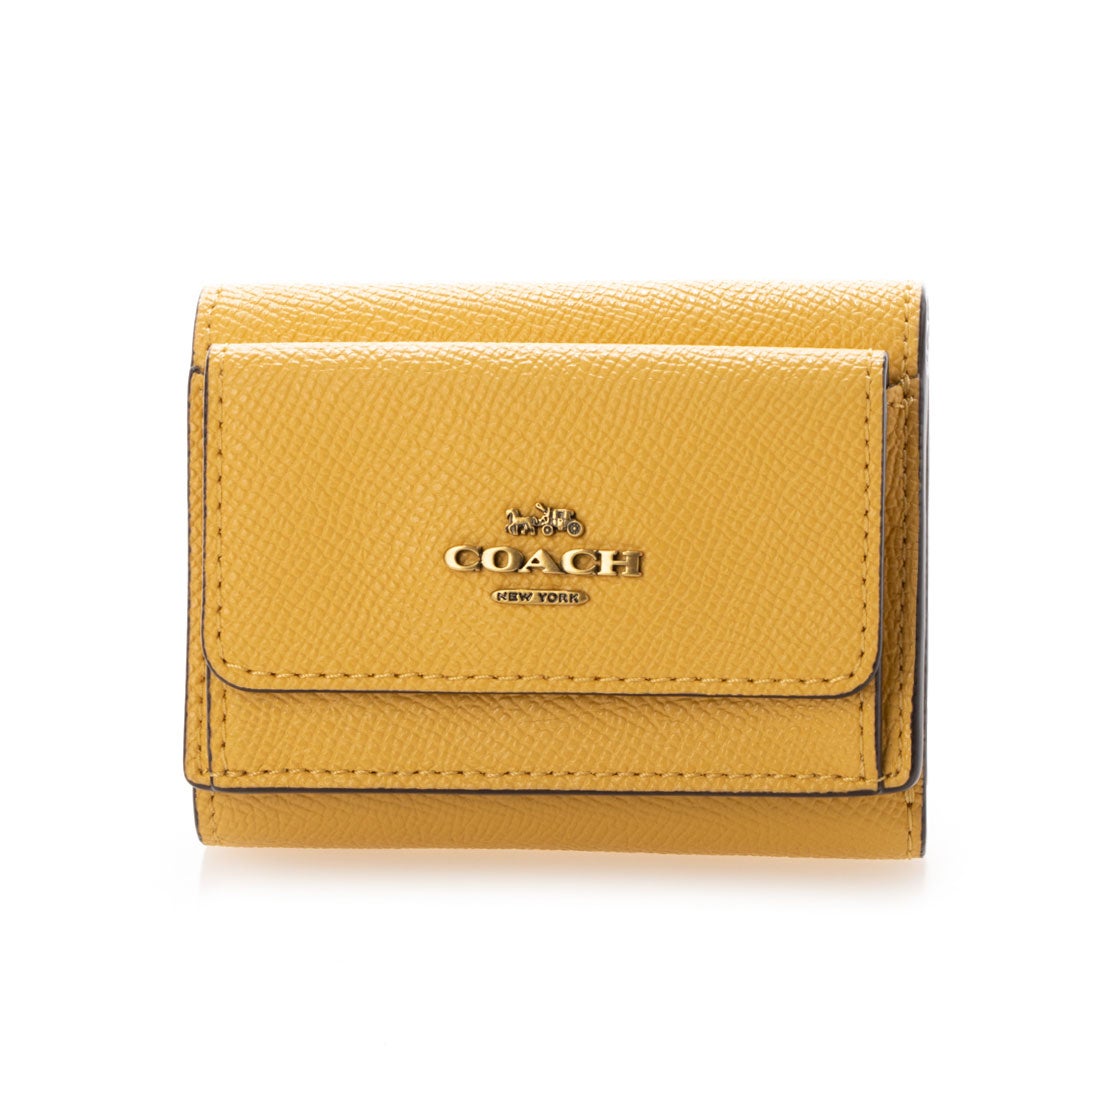 コーチ COACH 【Coach(コーチ)】Coach コーチ MINI TRIFOLD WALLET 85027b4puazz （イエロー系）